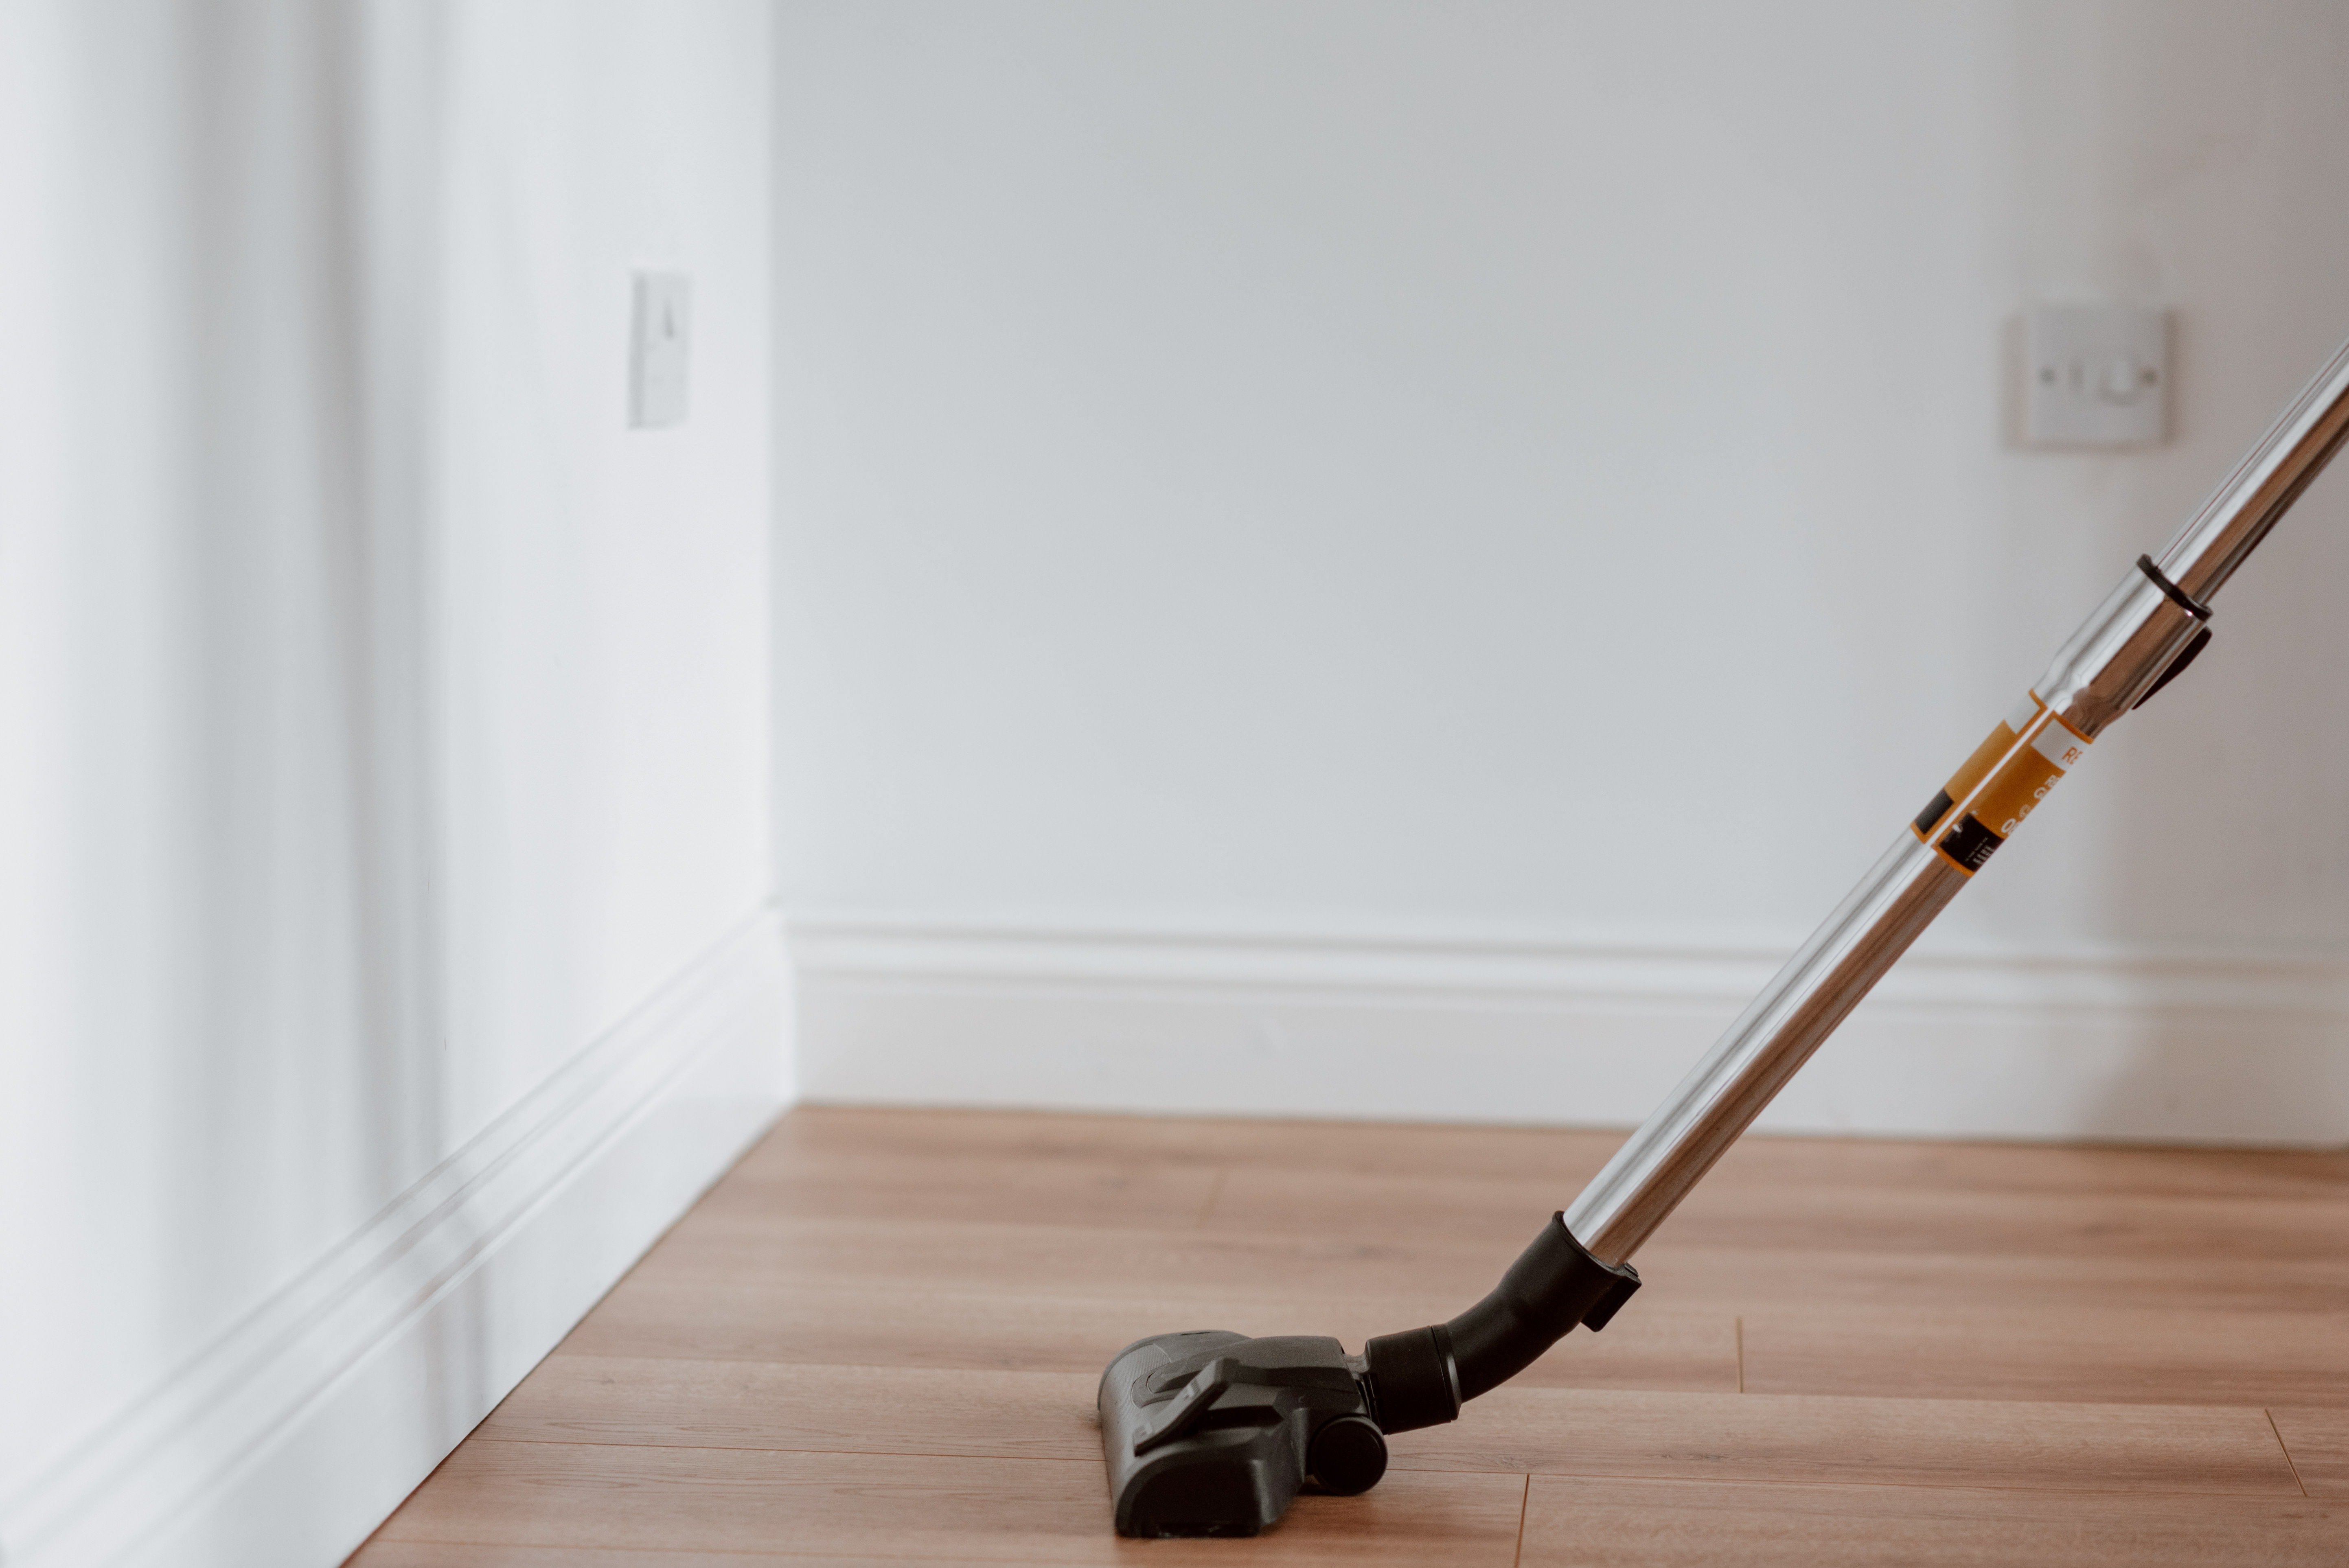 A vacuum cleaner on a wooden floor. | Photo: Pexels